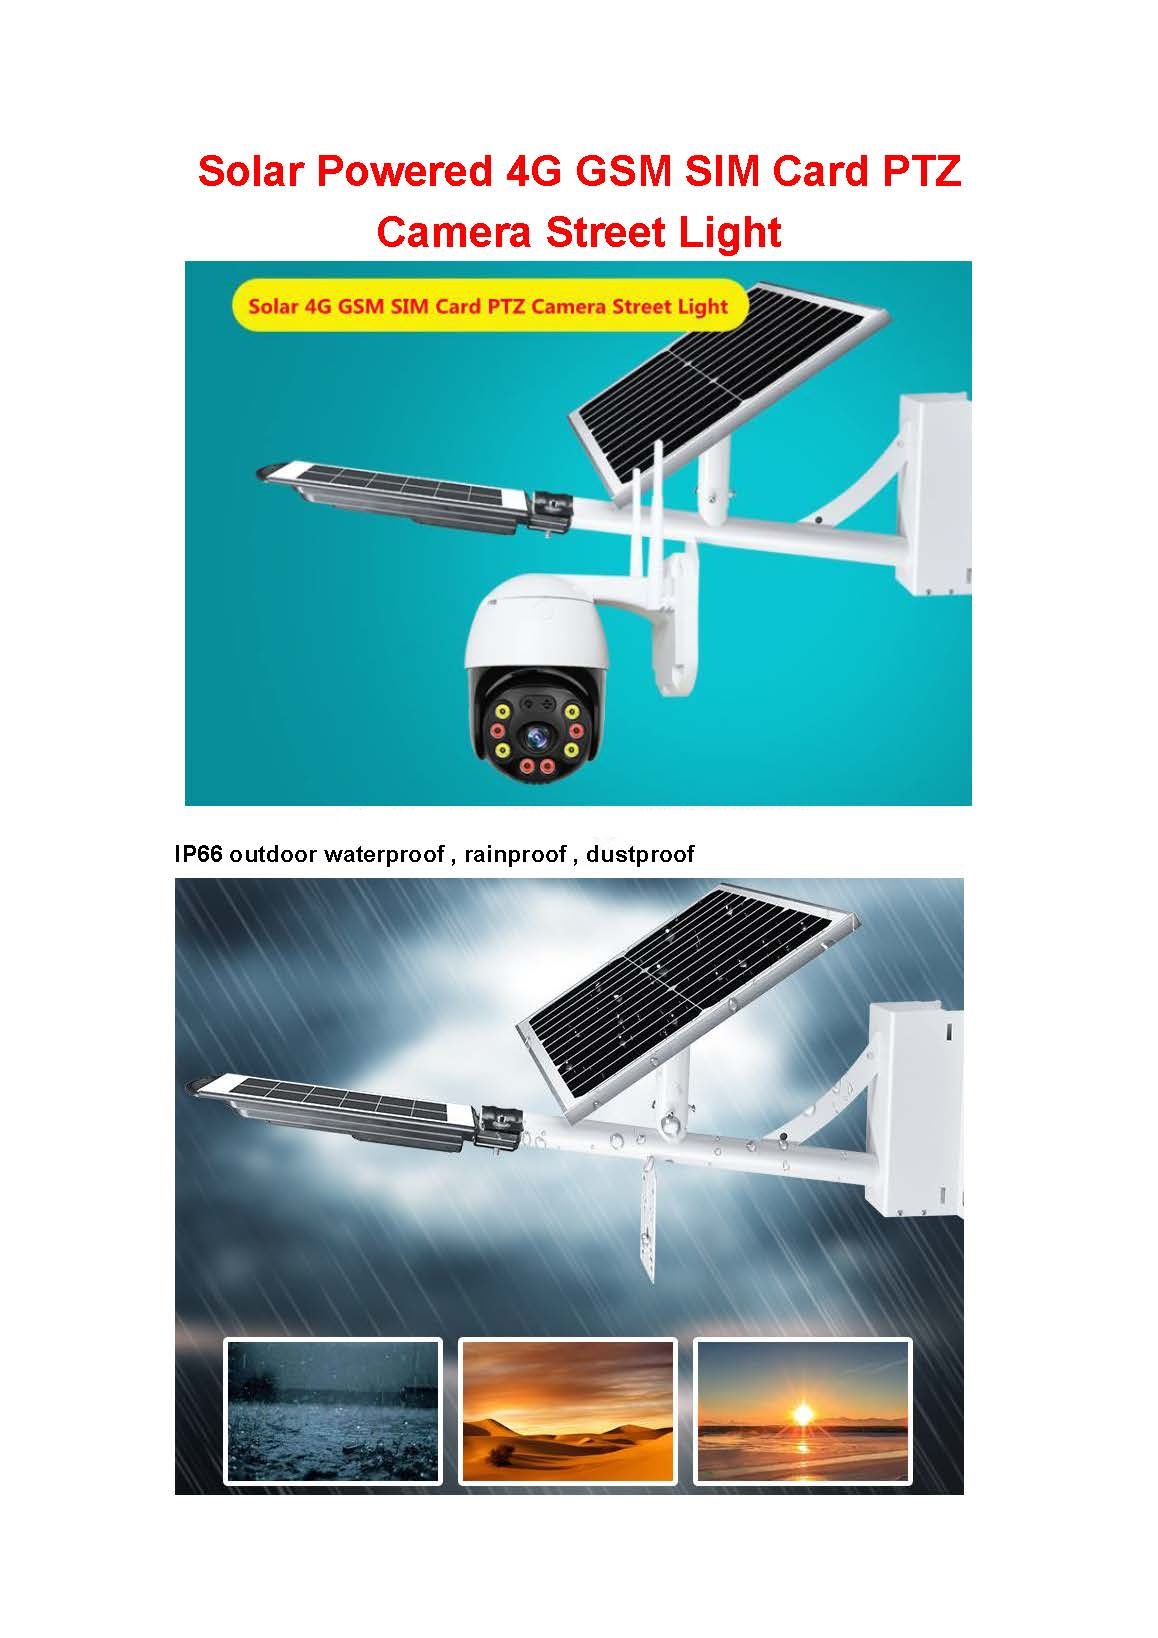 See information on our Solar Powered 4G GSM PTZ Camera Street Light attached